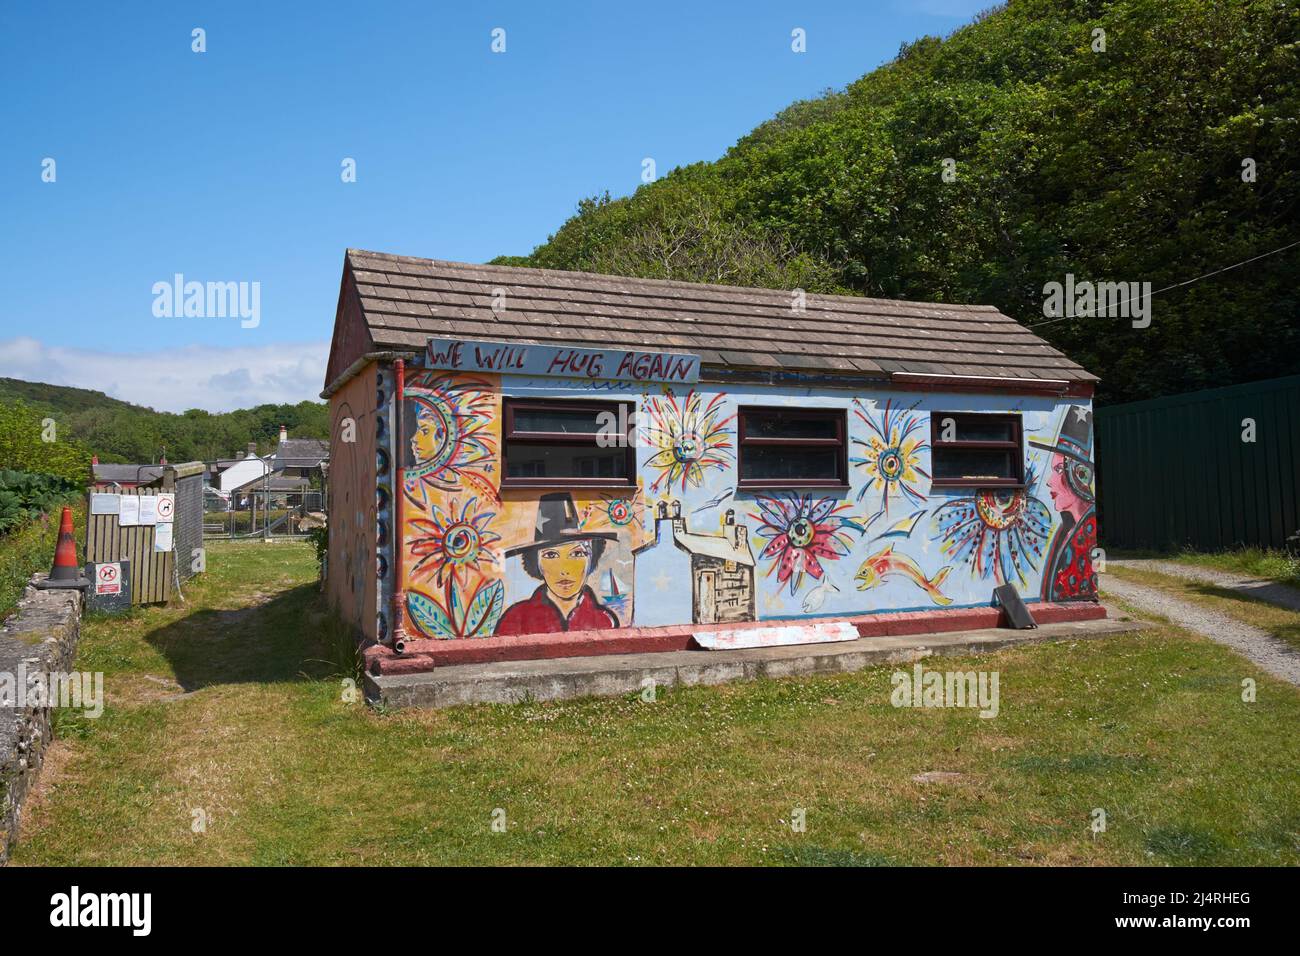 A mural painted on an outbuilding during the Covid pandemic. Solva, Pembrokeshire, Wales, UK. Stock Photo